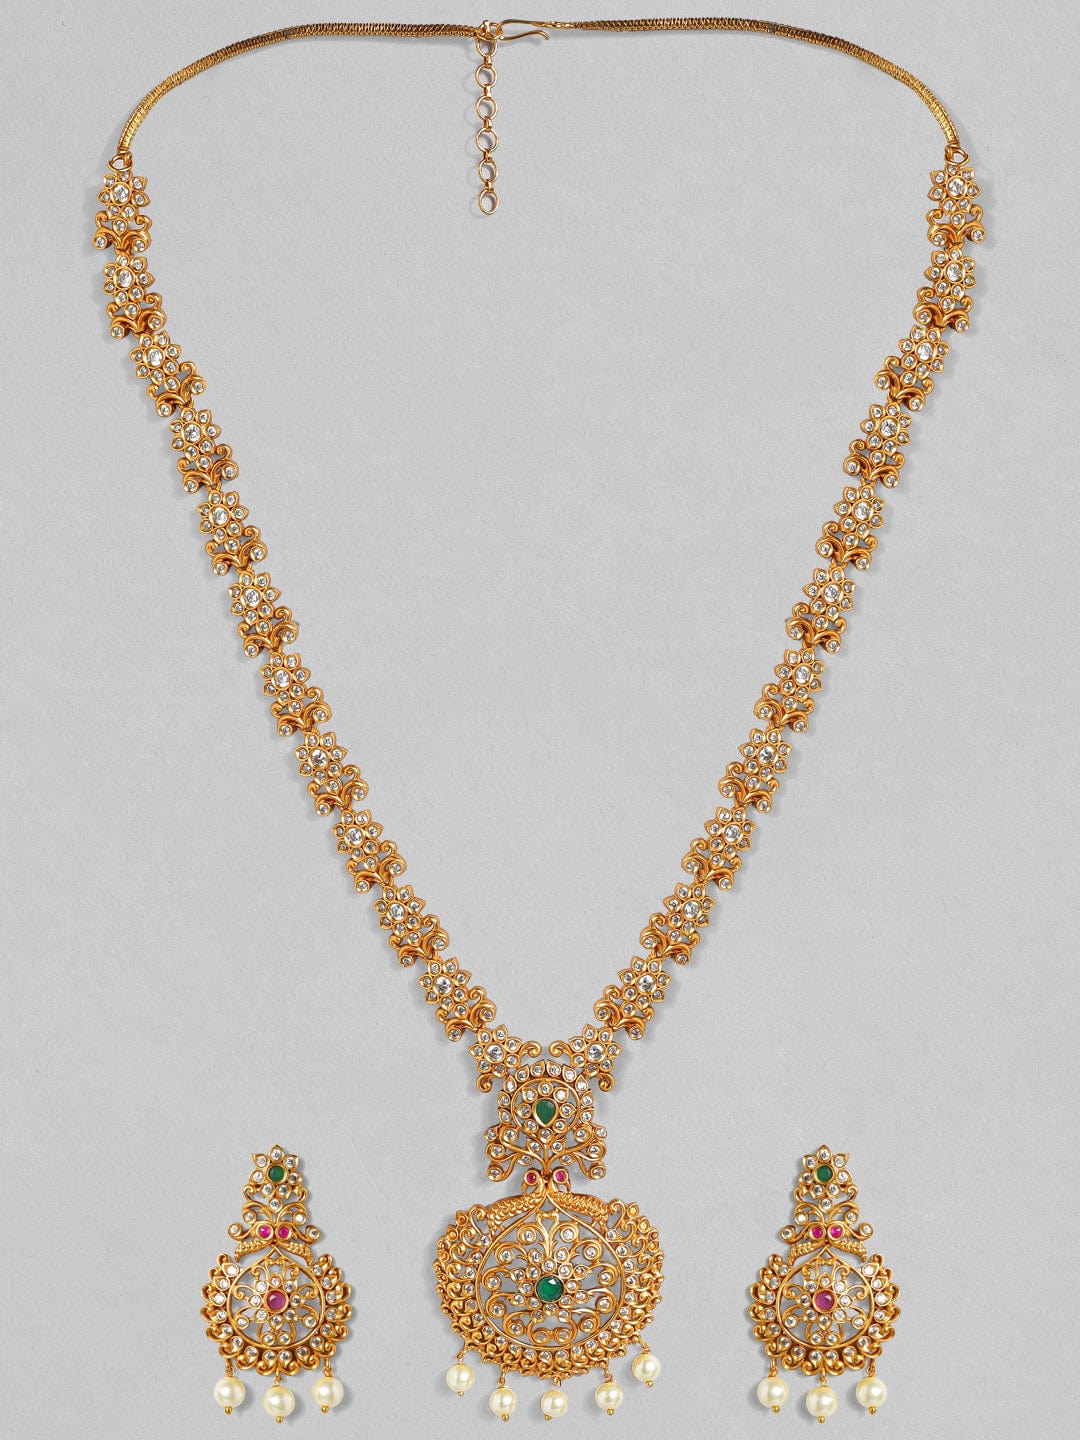 Rubans Gold-Toned Stone-Studded Handcrafted Jewellery Set Necklace Set